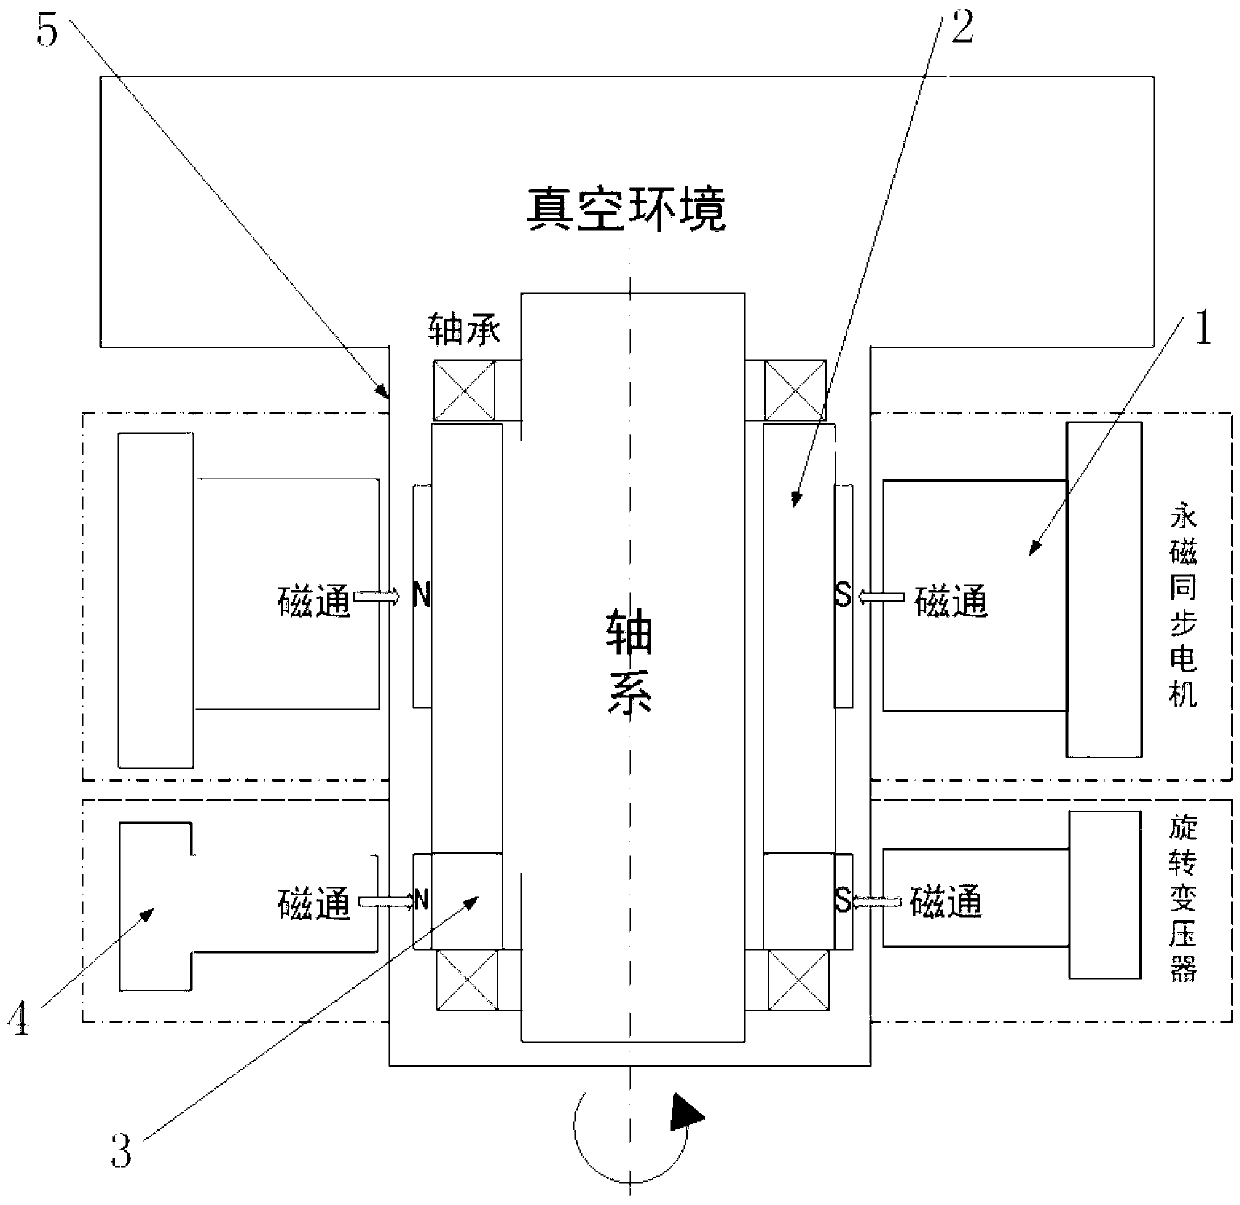 Axis static state vacuum partition method of integrated rotary transformer